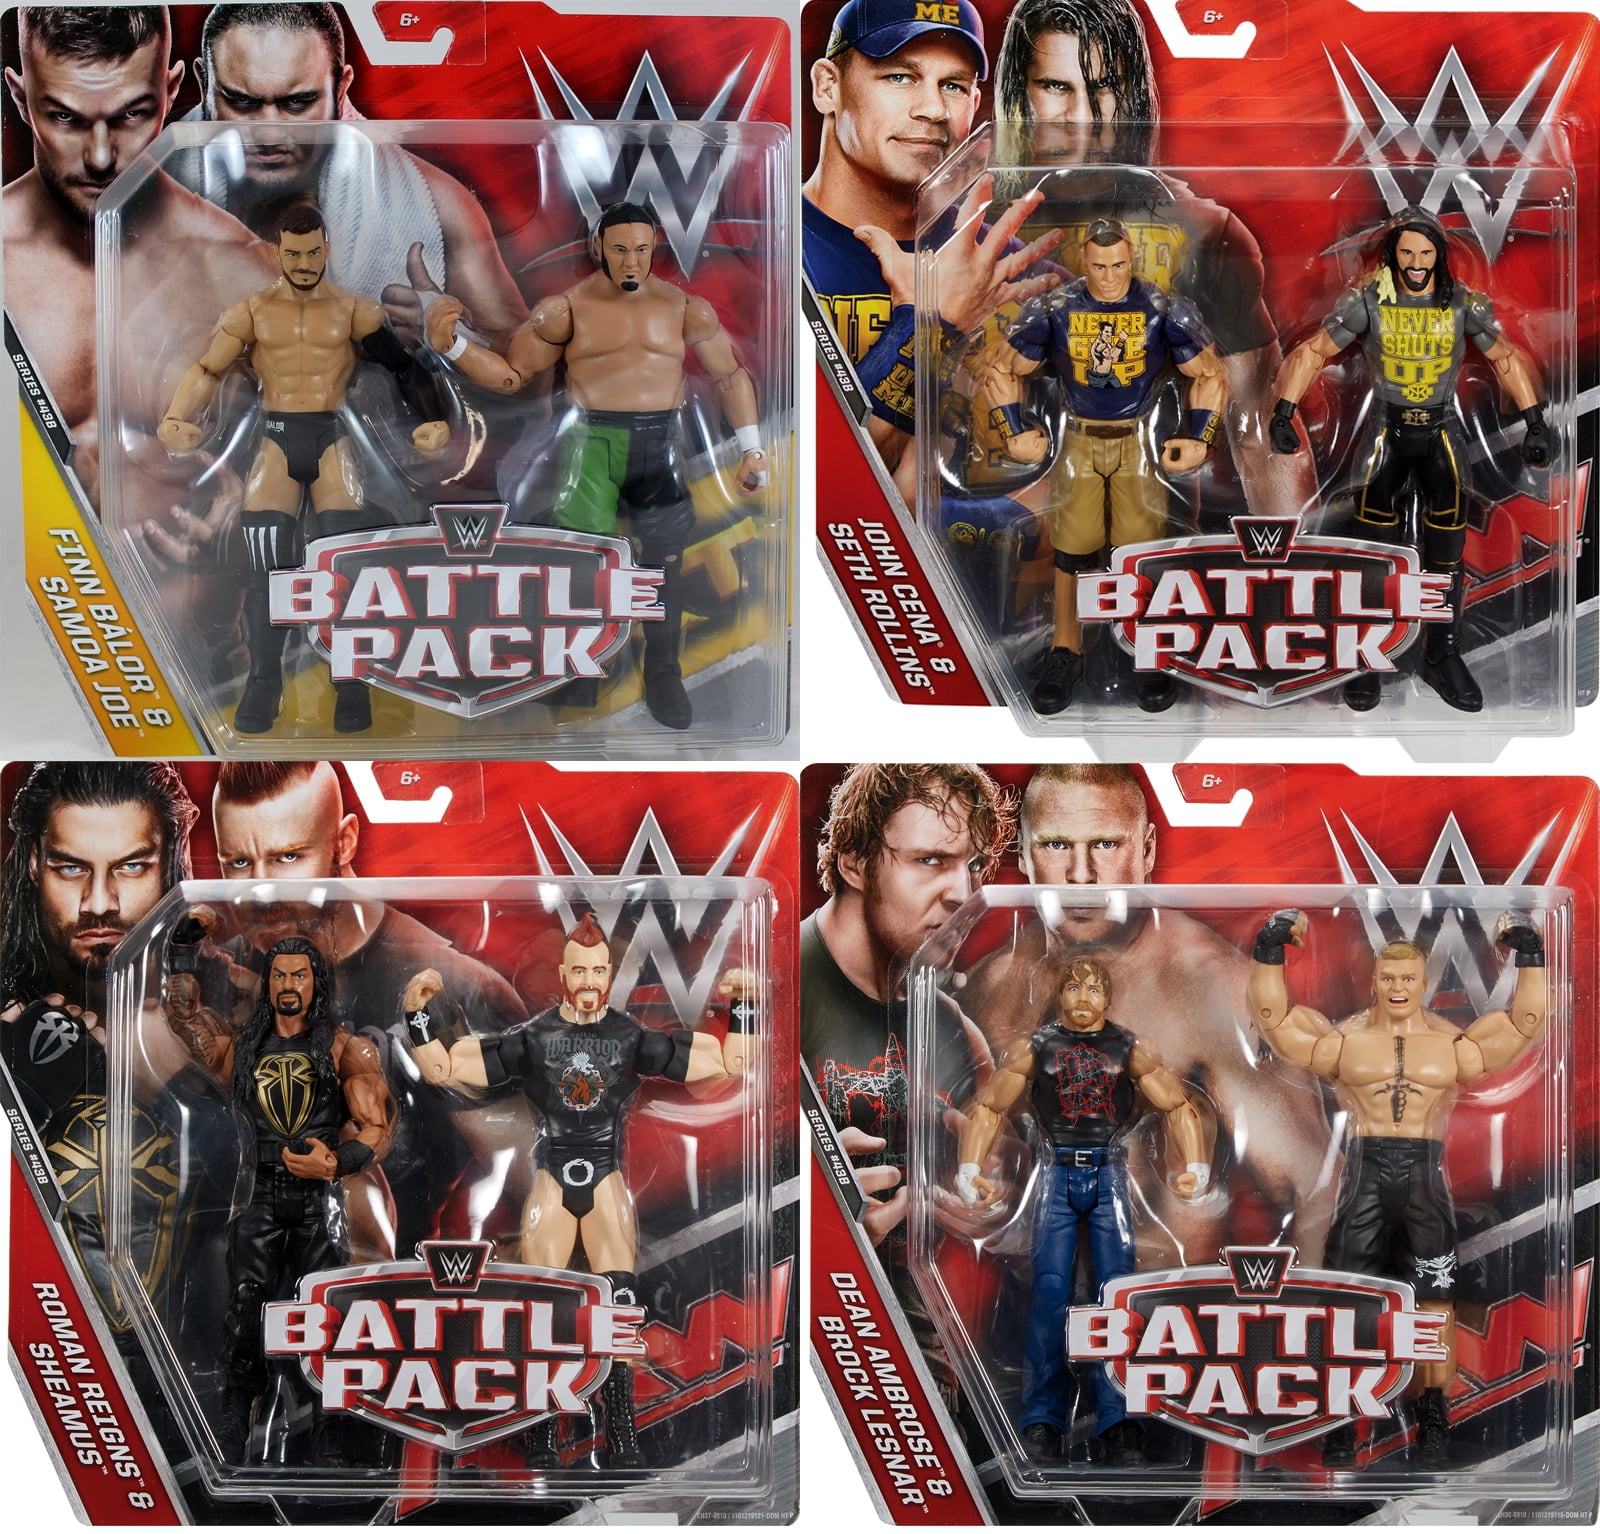 NEW WWE Battle Pack Brock Lesnar vs Roman Reigns Figures 2-Pack FREE SHIPPING